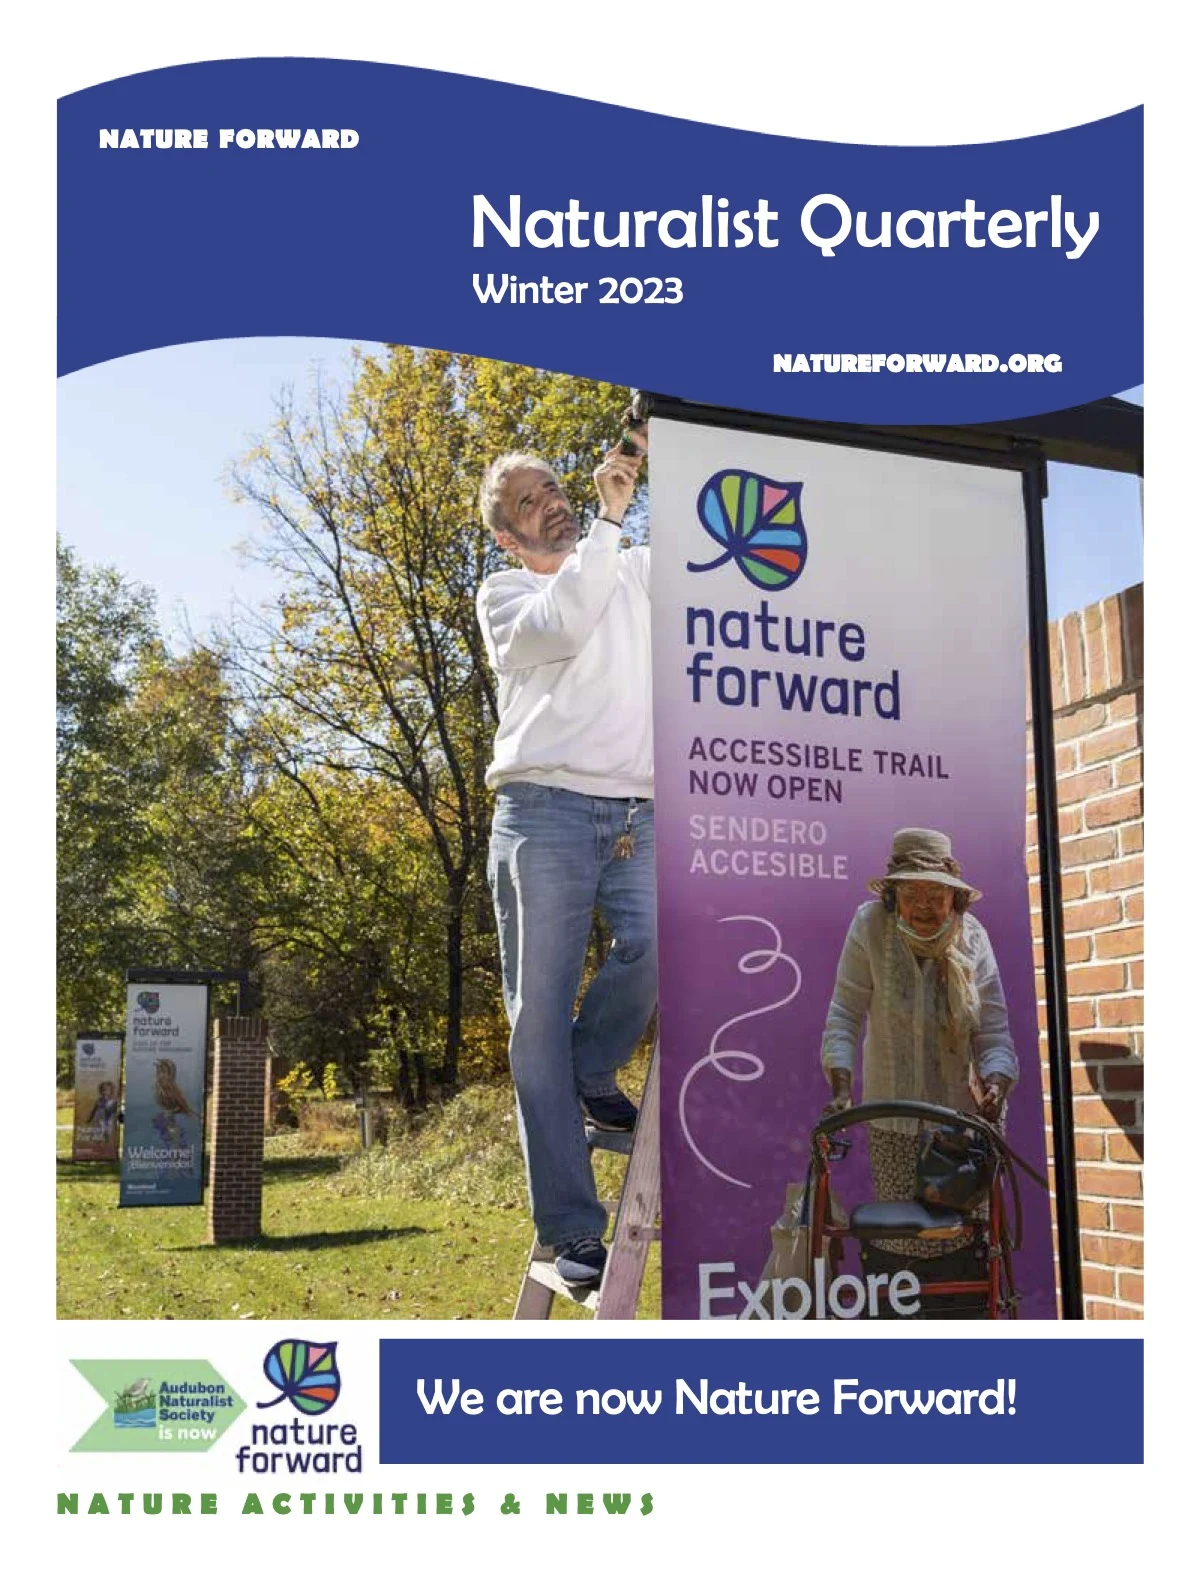 The Naturalist Quarterly for Winter 2022-2023